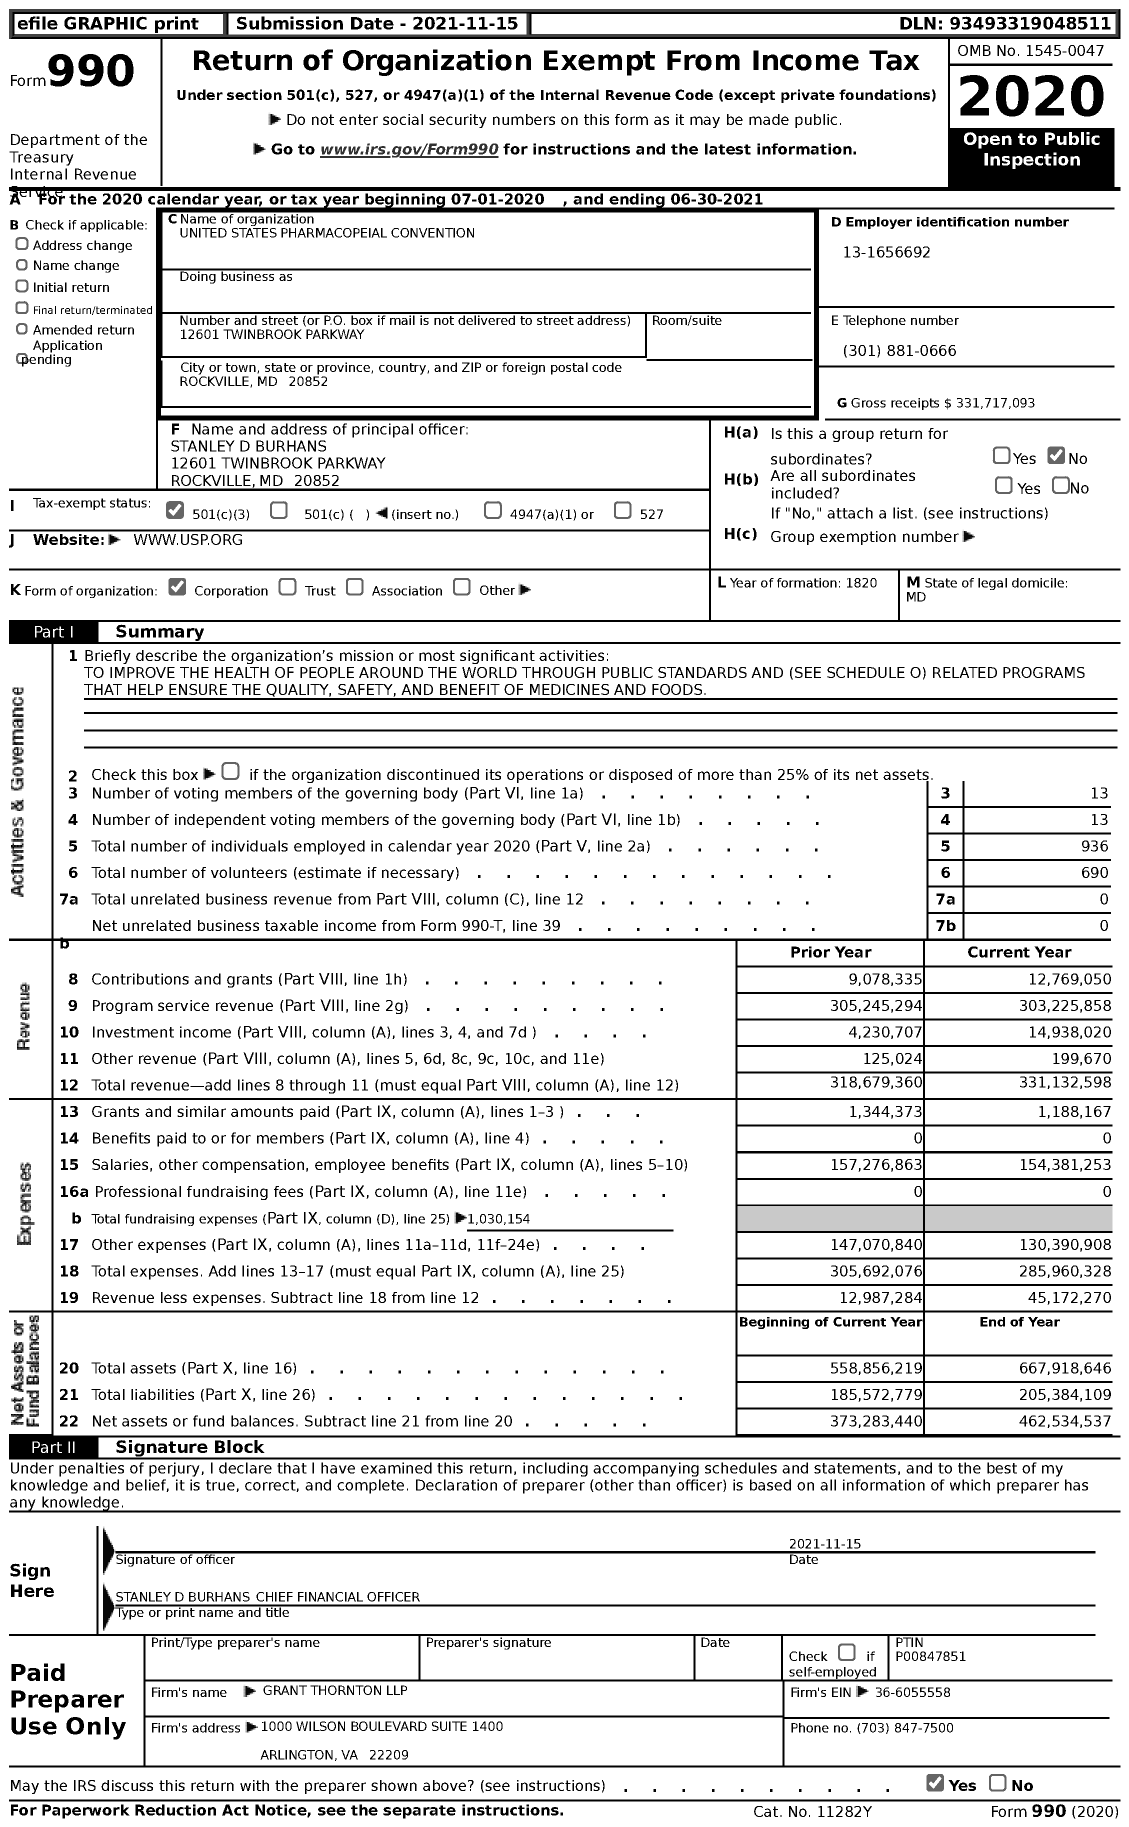 Image of first page of 2020 Form 990 for United States Pharmacopoeial Convention (USP)